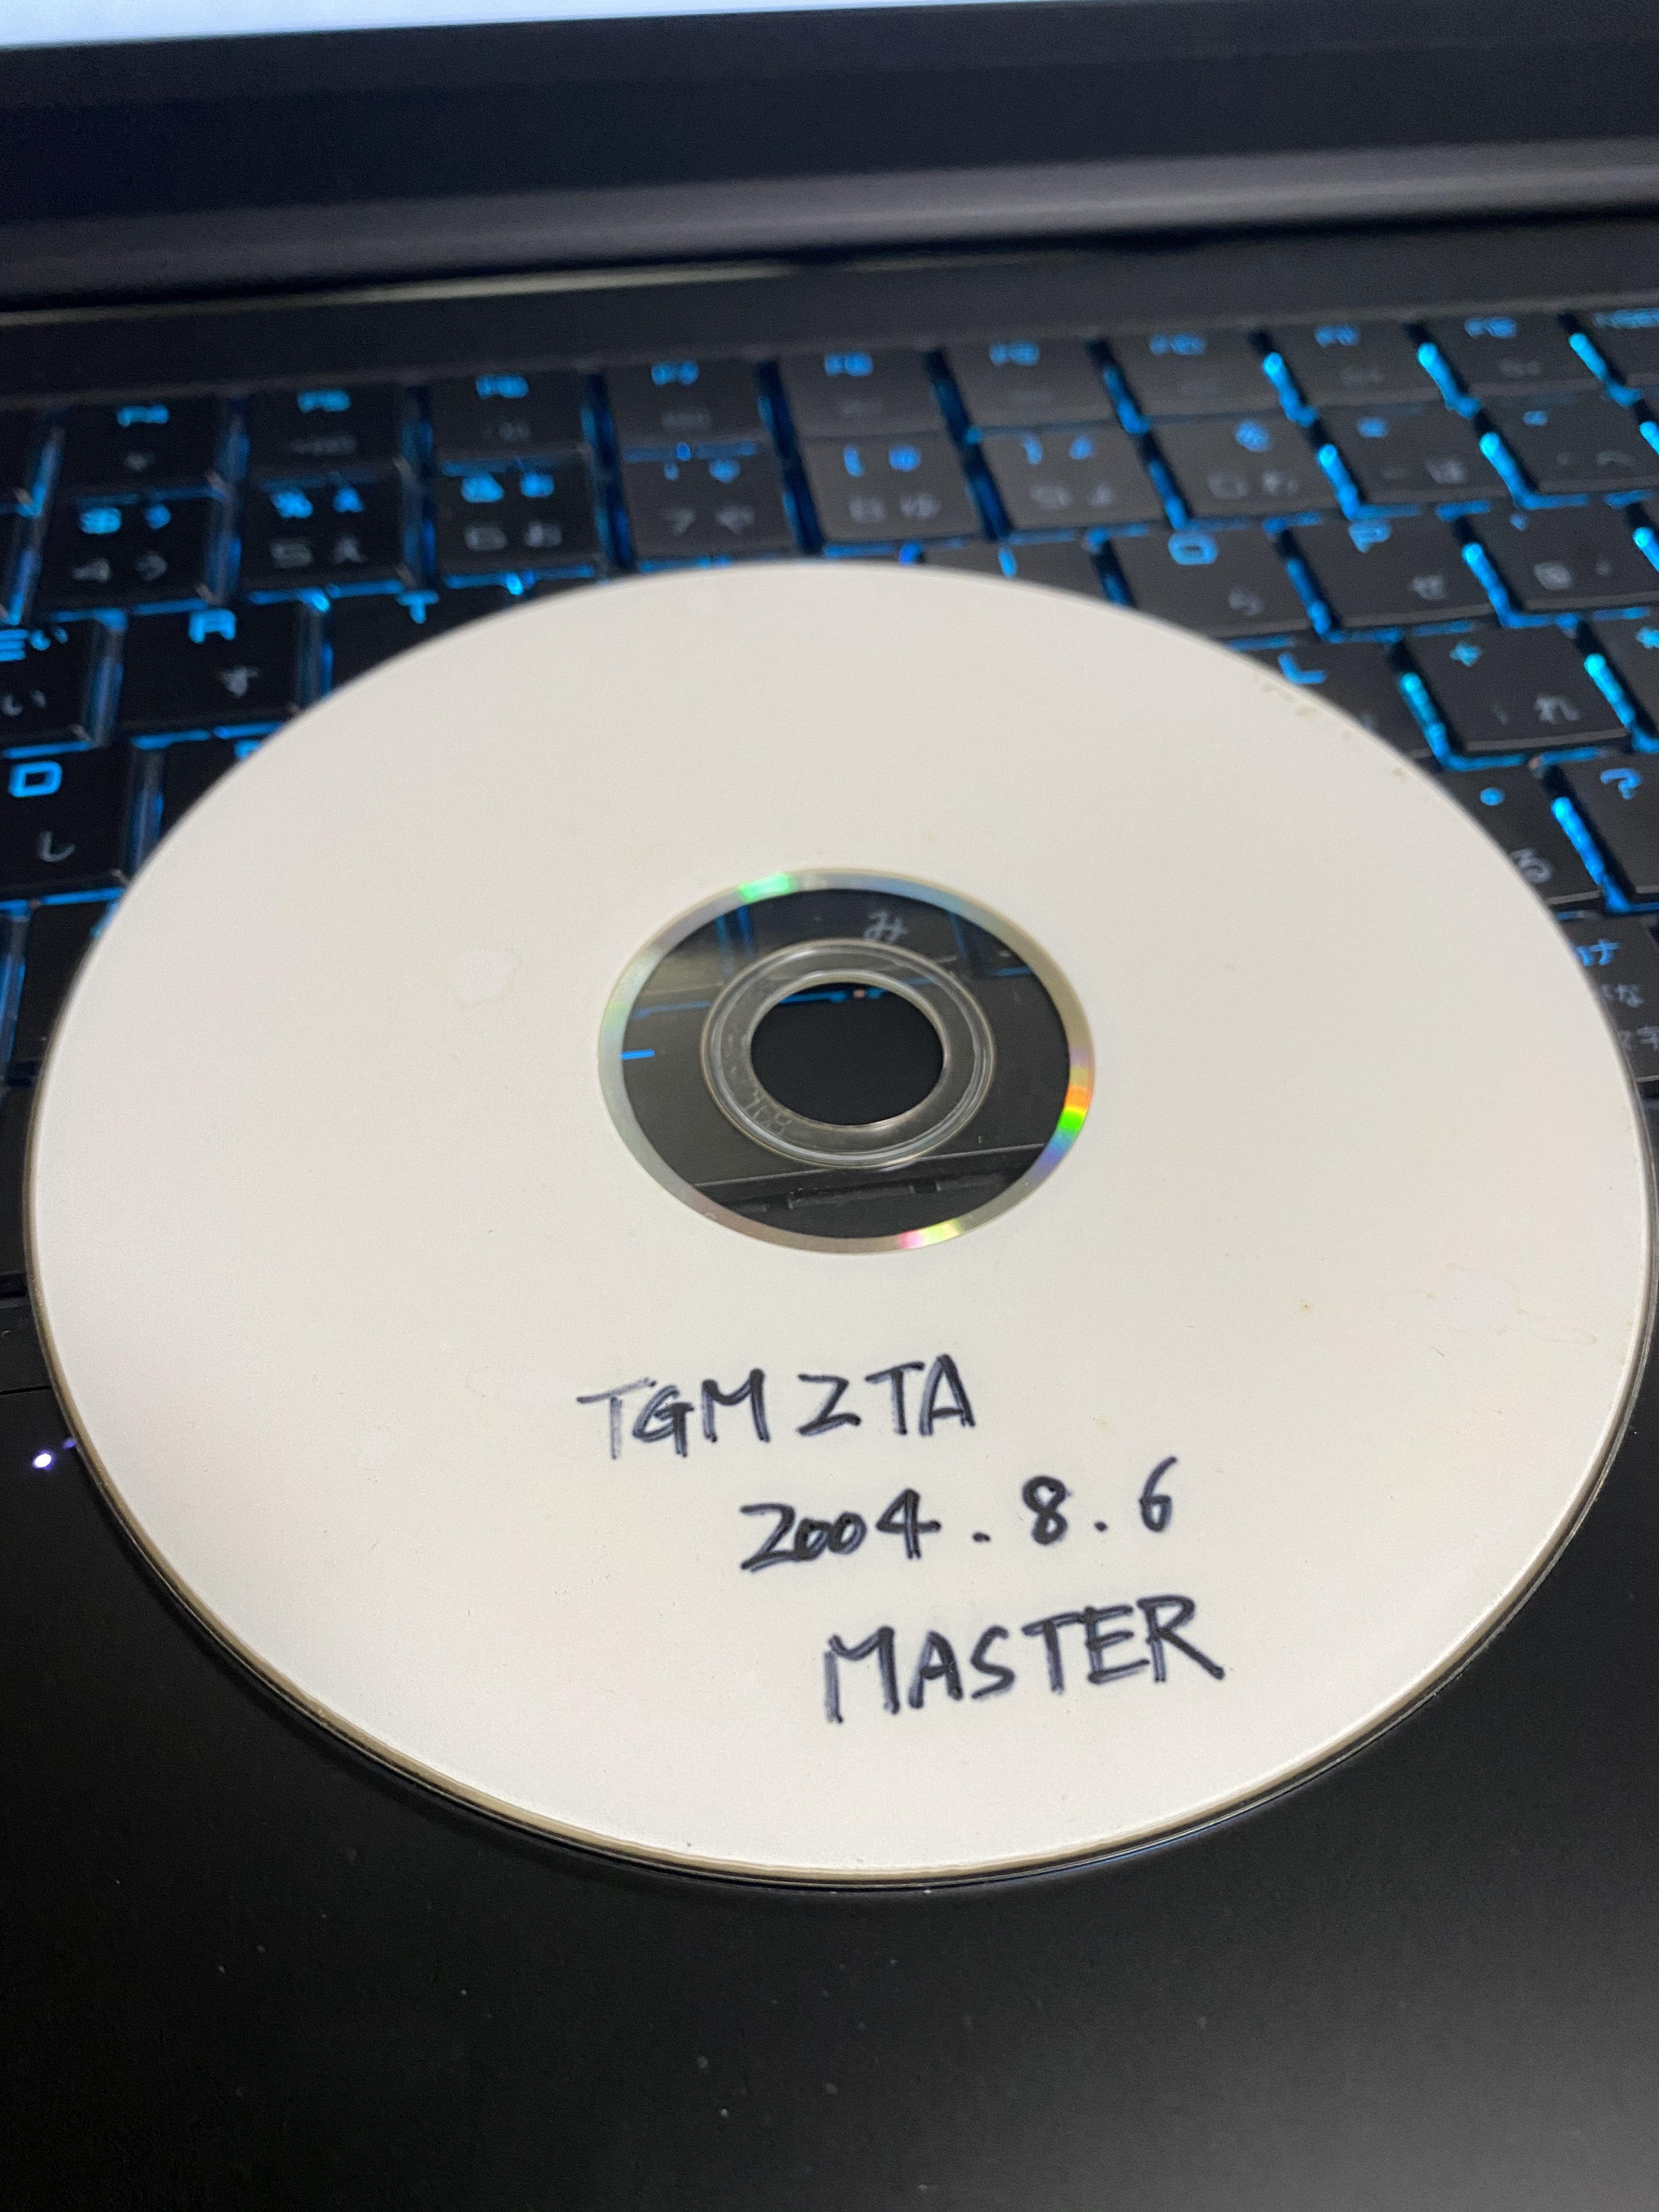 A photo of a CD-RW with a hand written text on it saying: 'TGM2TA 2004.8.6 MASTER'.